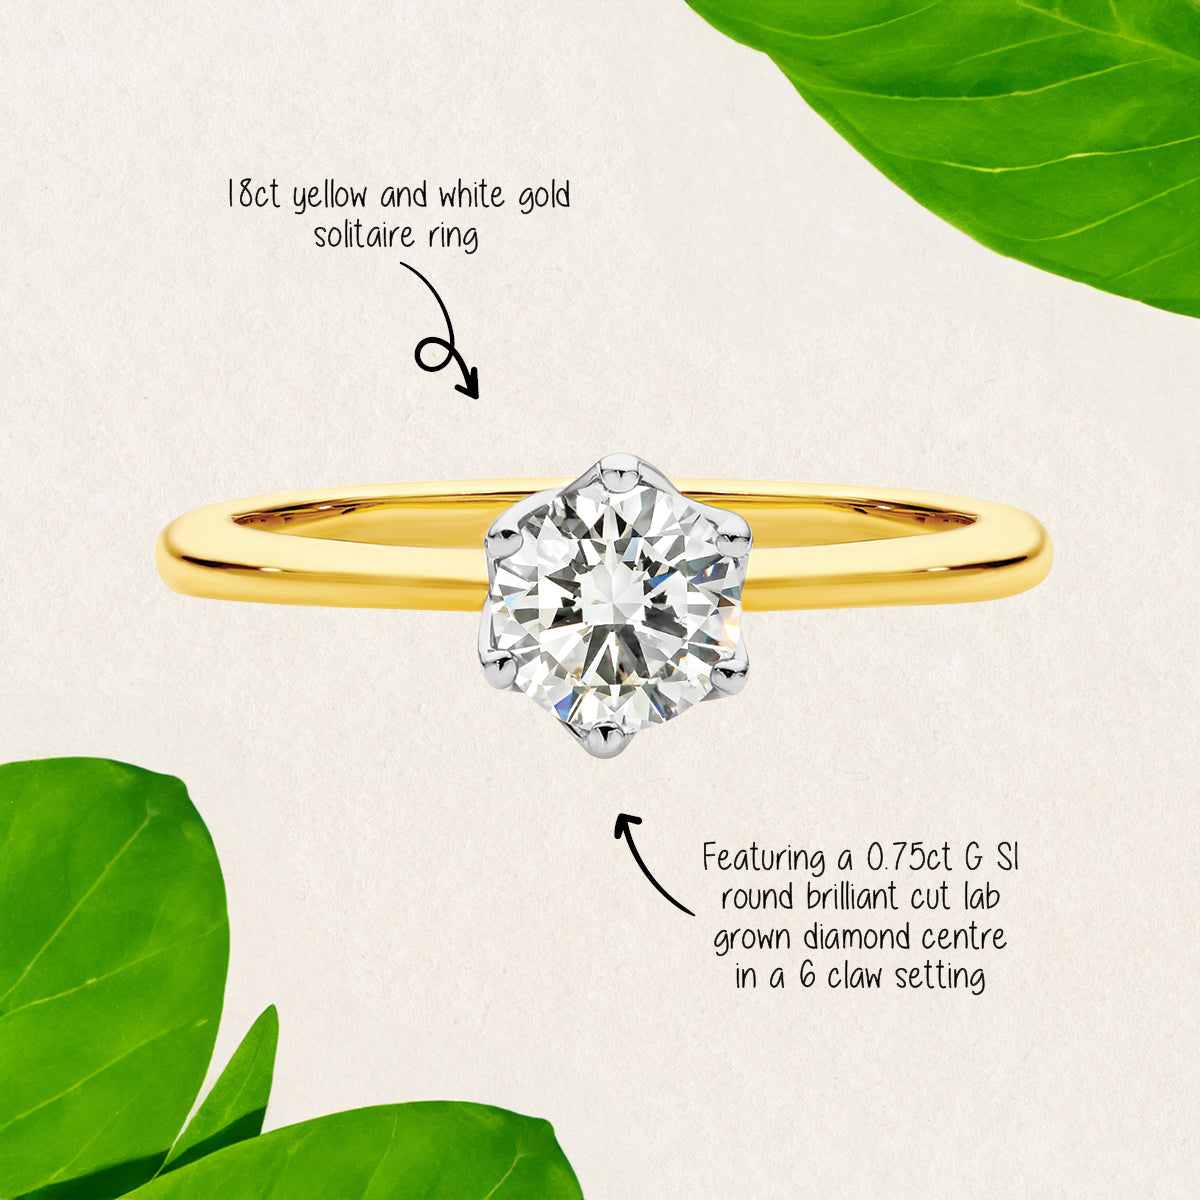 Featuring 0.75ct G SI round brilliant cut lab grown diamond solitaire ring by greenhouse diamonds